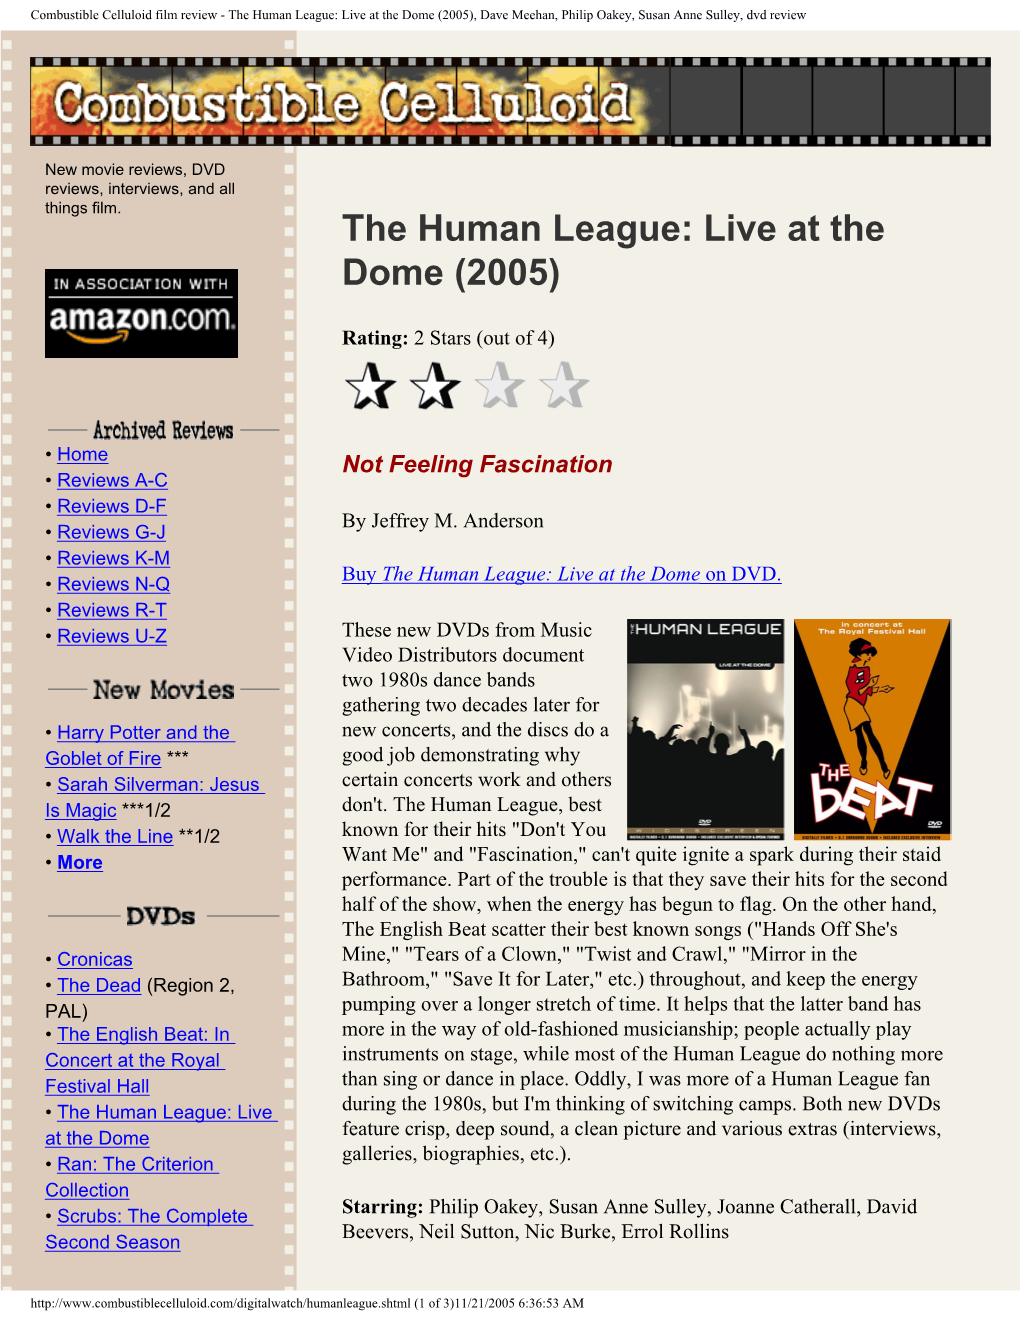 Combustible Celluloid Film Review - the Human League: Live at the Dome (2005), Dave Meehan, Philip Oakey, Susan Anne Sulley, Dvd Review